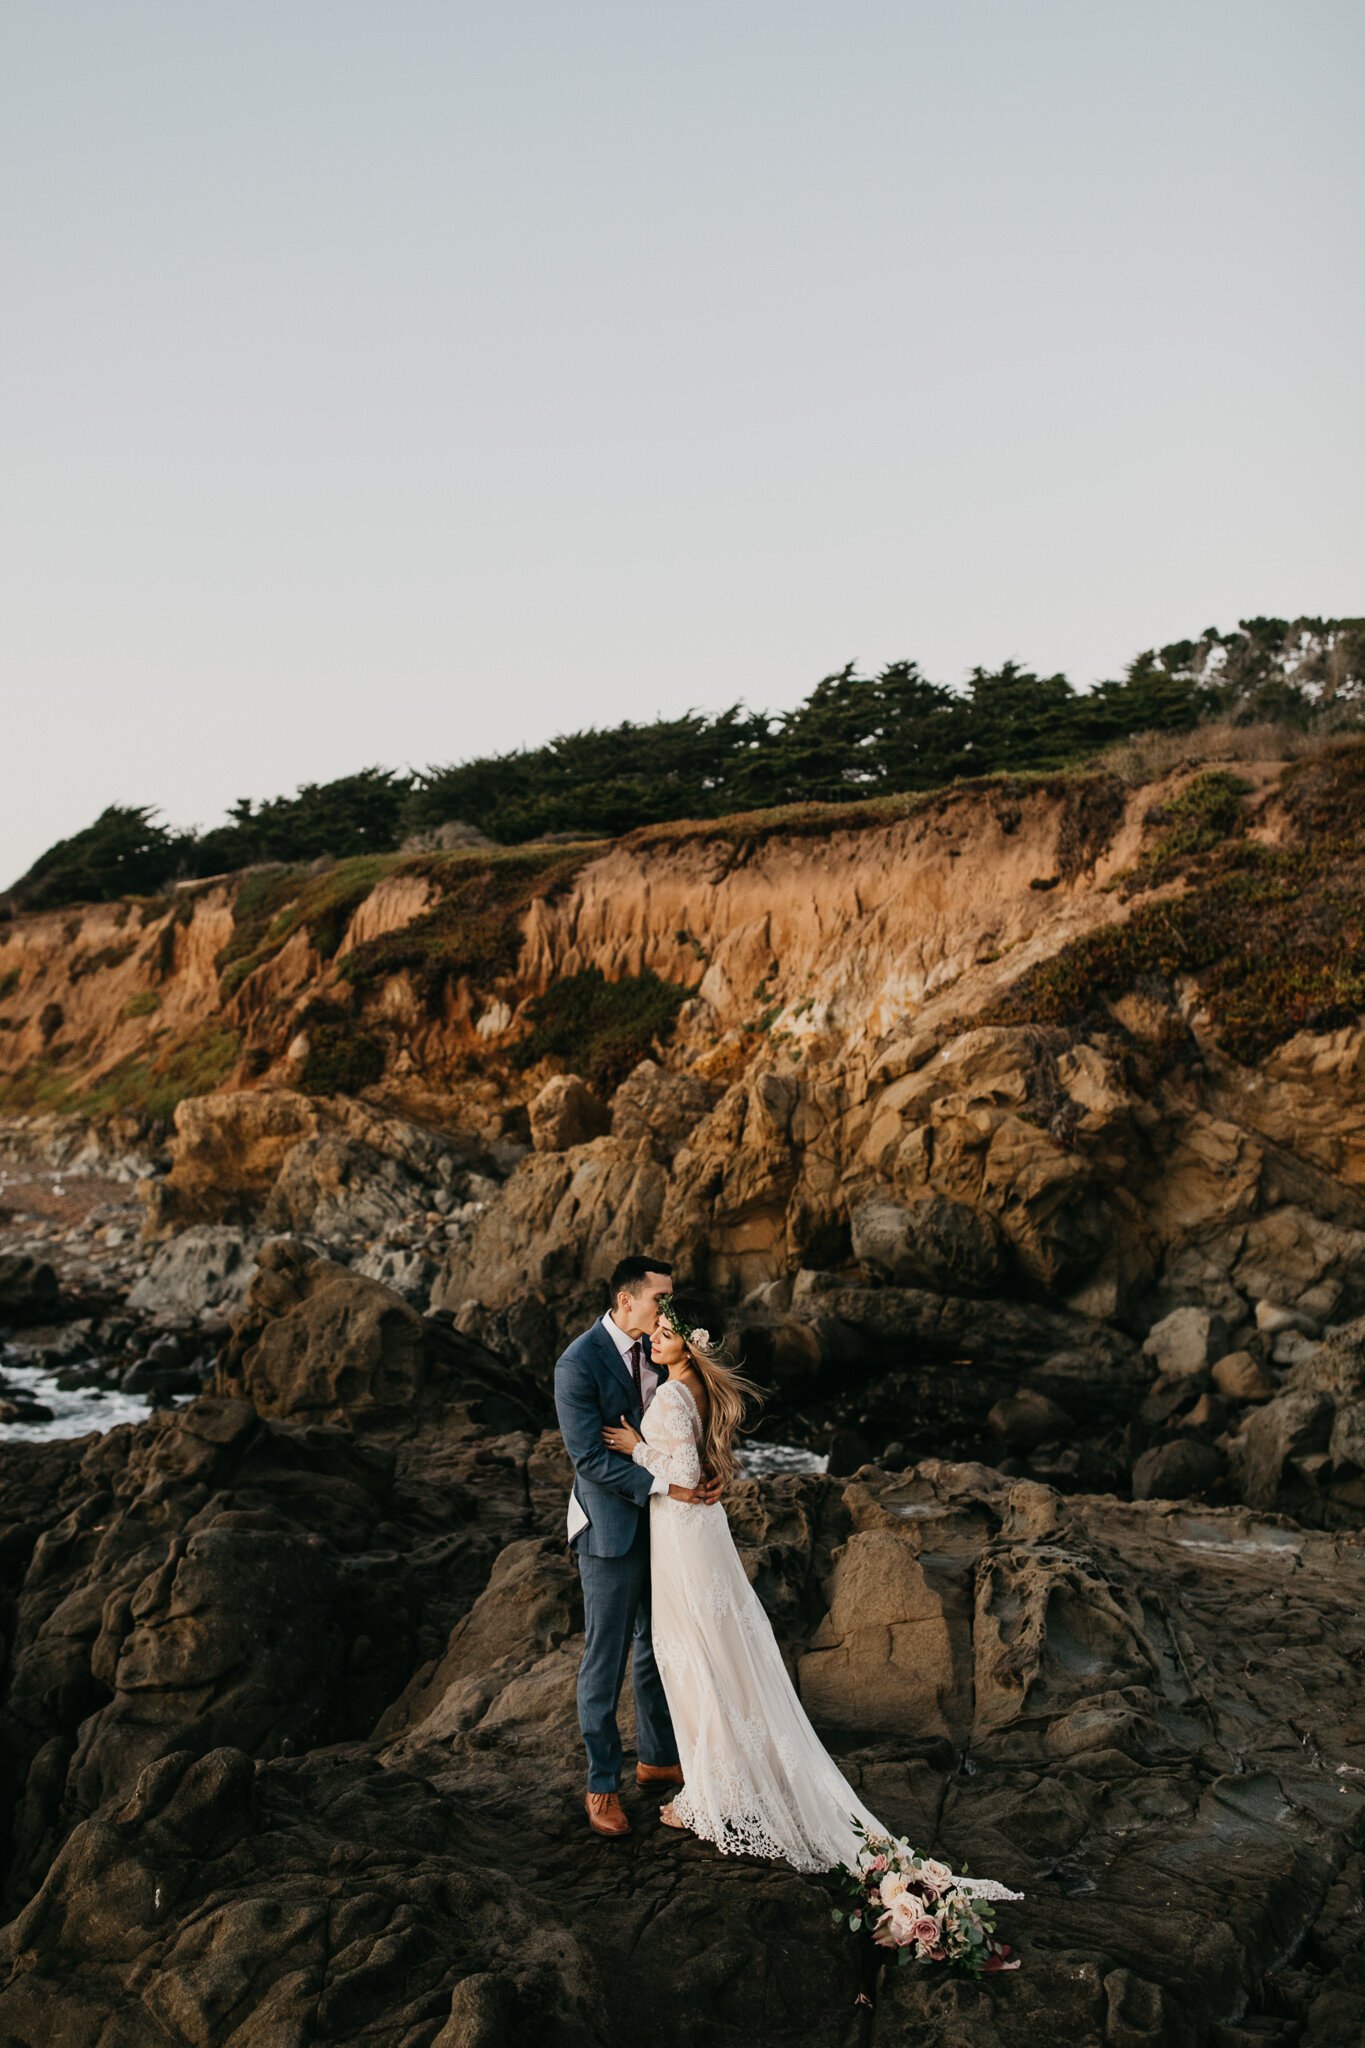 5 Things to do Now that You're Engaged. Beach elopement on cliffs of Cambria, CA.